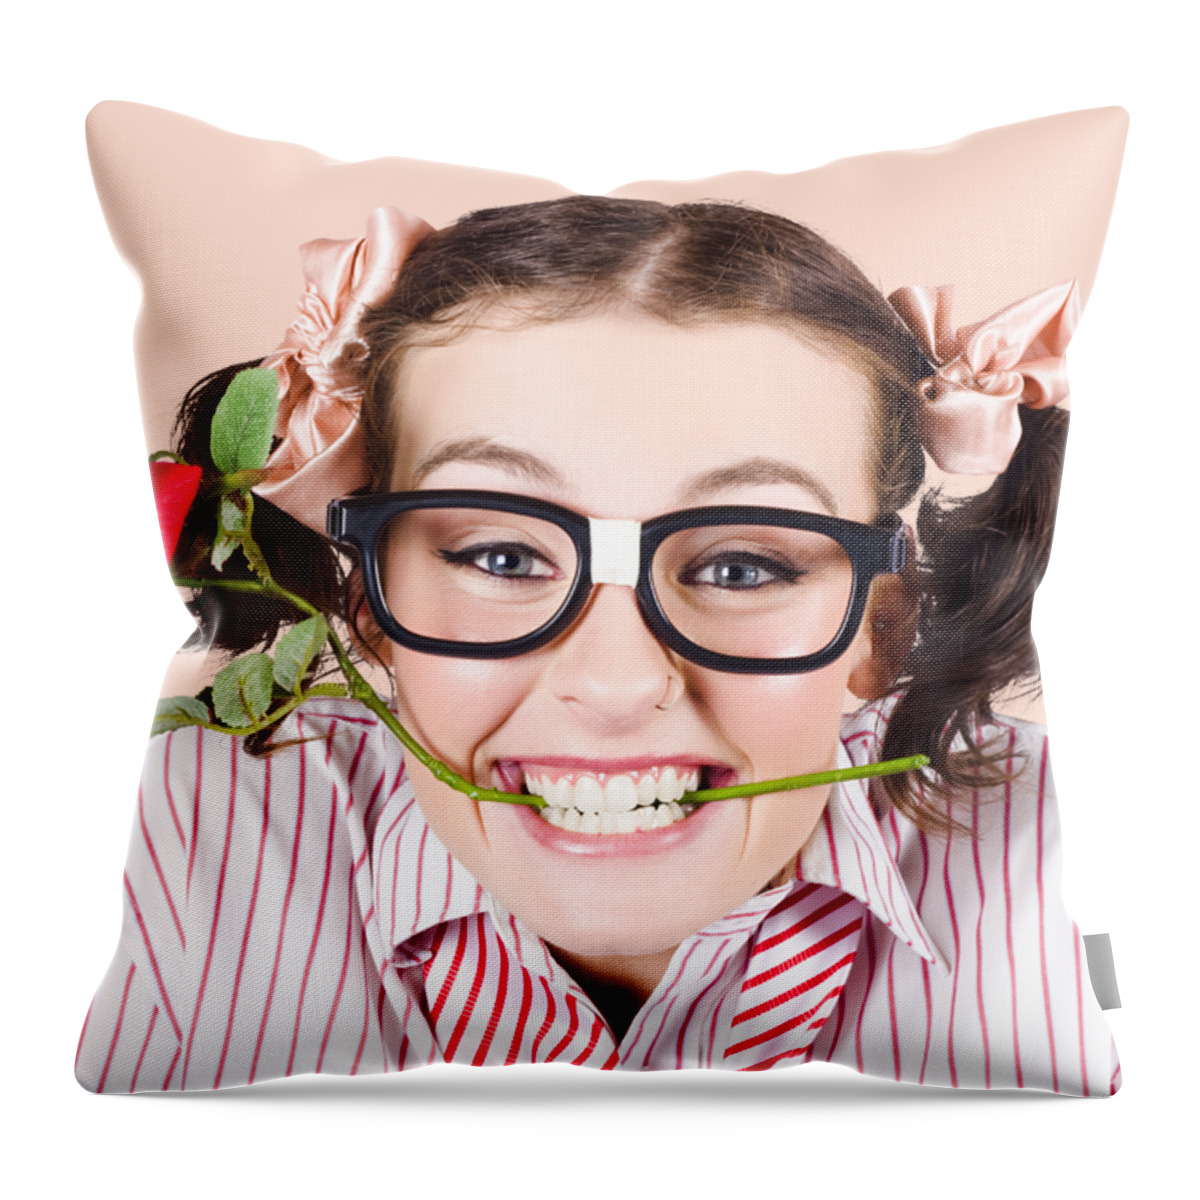 Funny Throw Pillow featuring the photograph Cute Smiling Woman Wearing Nerd Glasses With Rose by Jorgo Photography